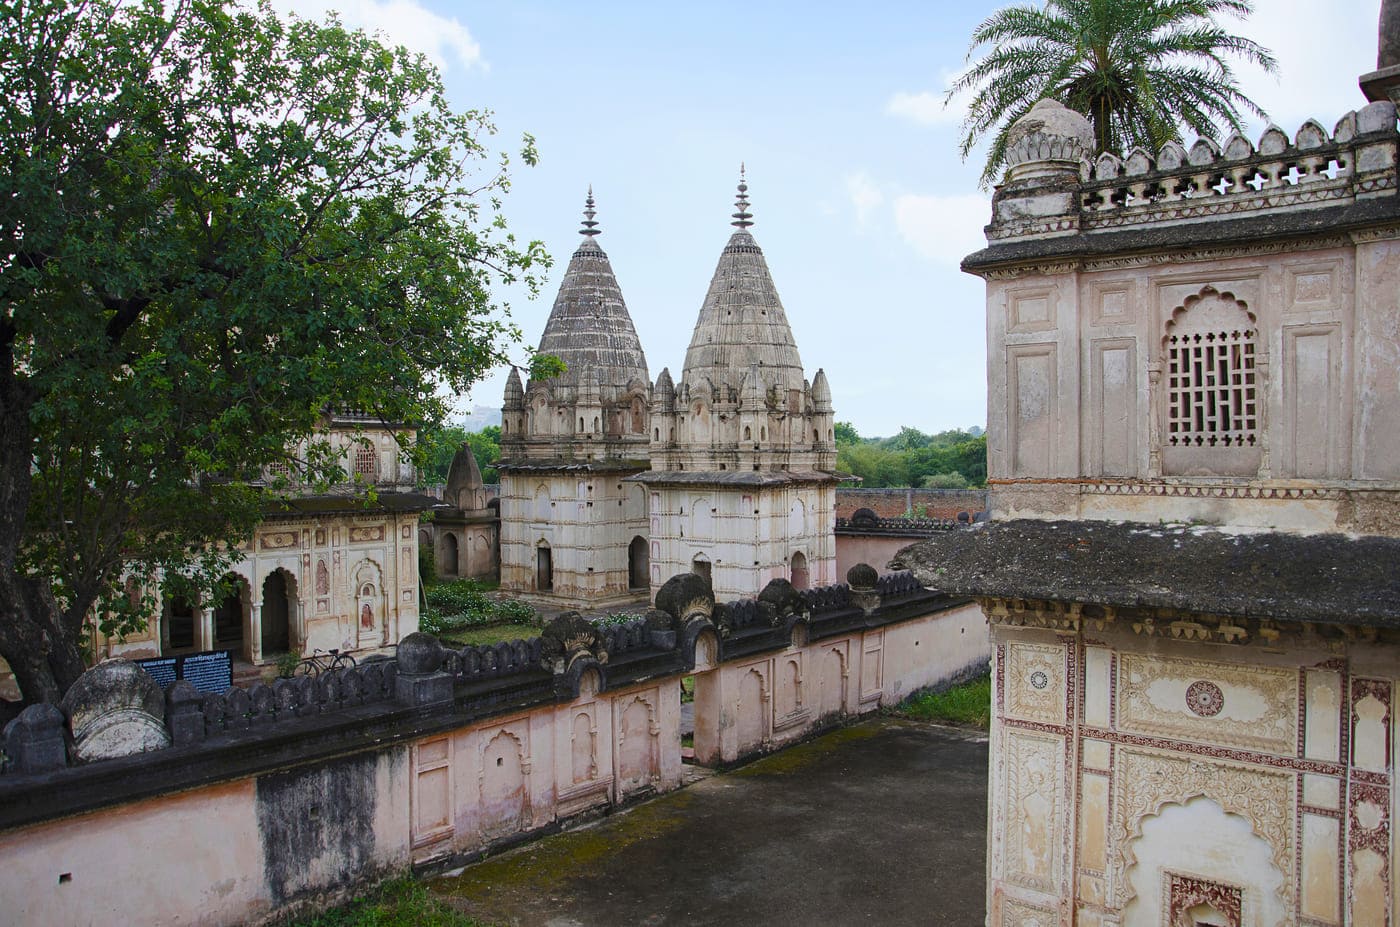 Chhatris (Royal Cenotaphs) of Datia Kings, Datia was once a state in the region of Bundelkhand. It was founded in 1626, Madhya Pradesh 